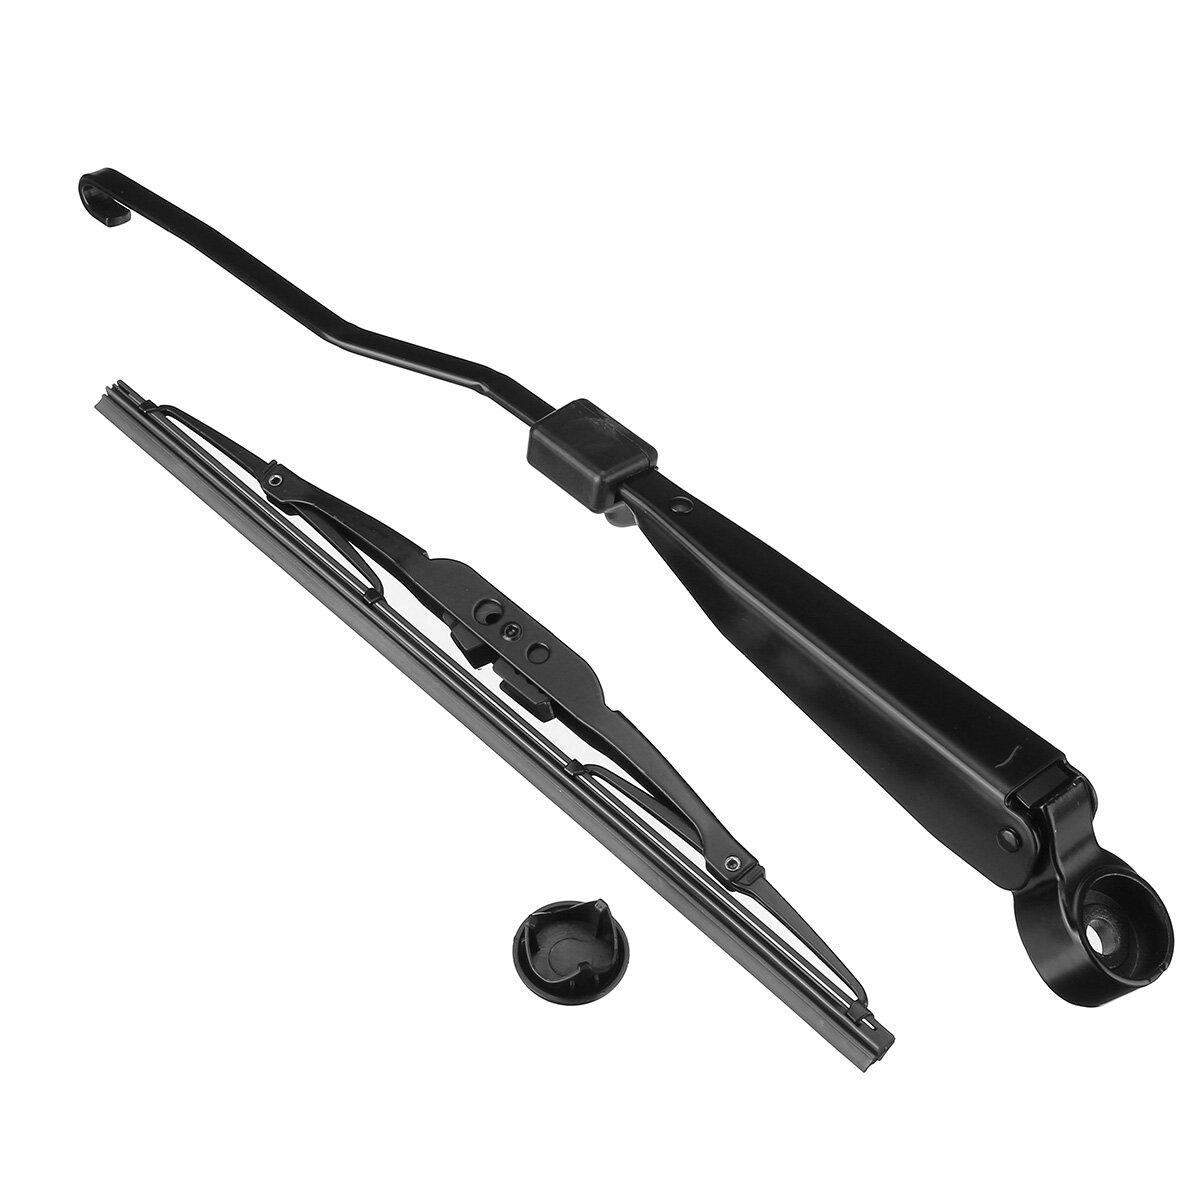 Car rear wiper arm with blade set for jeep grand cherokee 1999-2004 Sale - Banggood.com 1999 Jeep Grand Cherokee Windshield Wiper Size